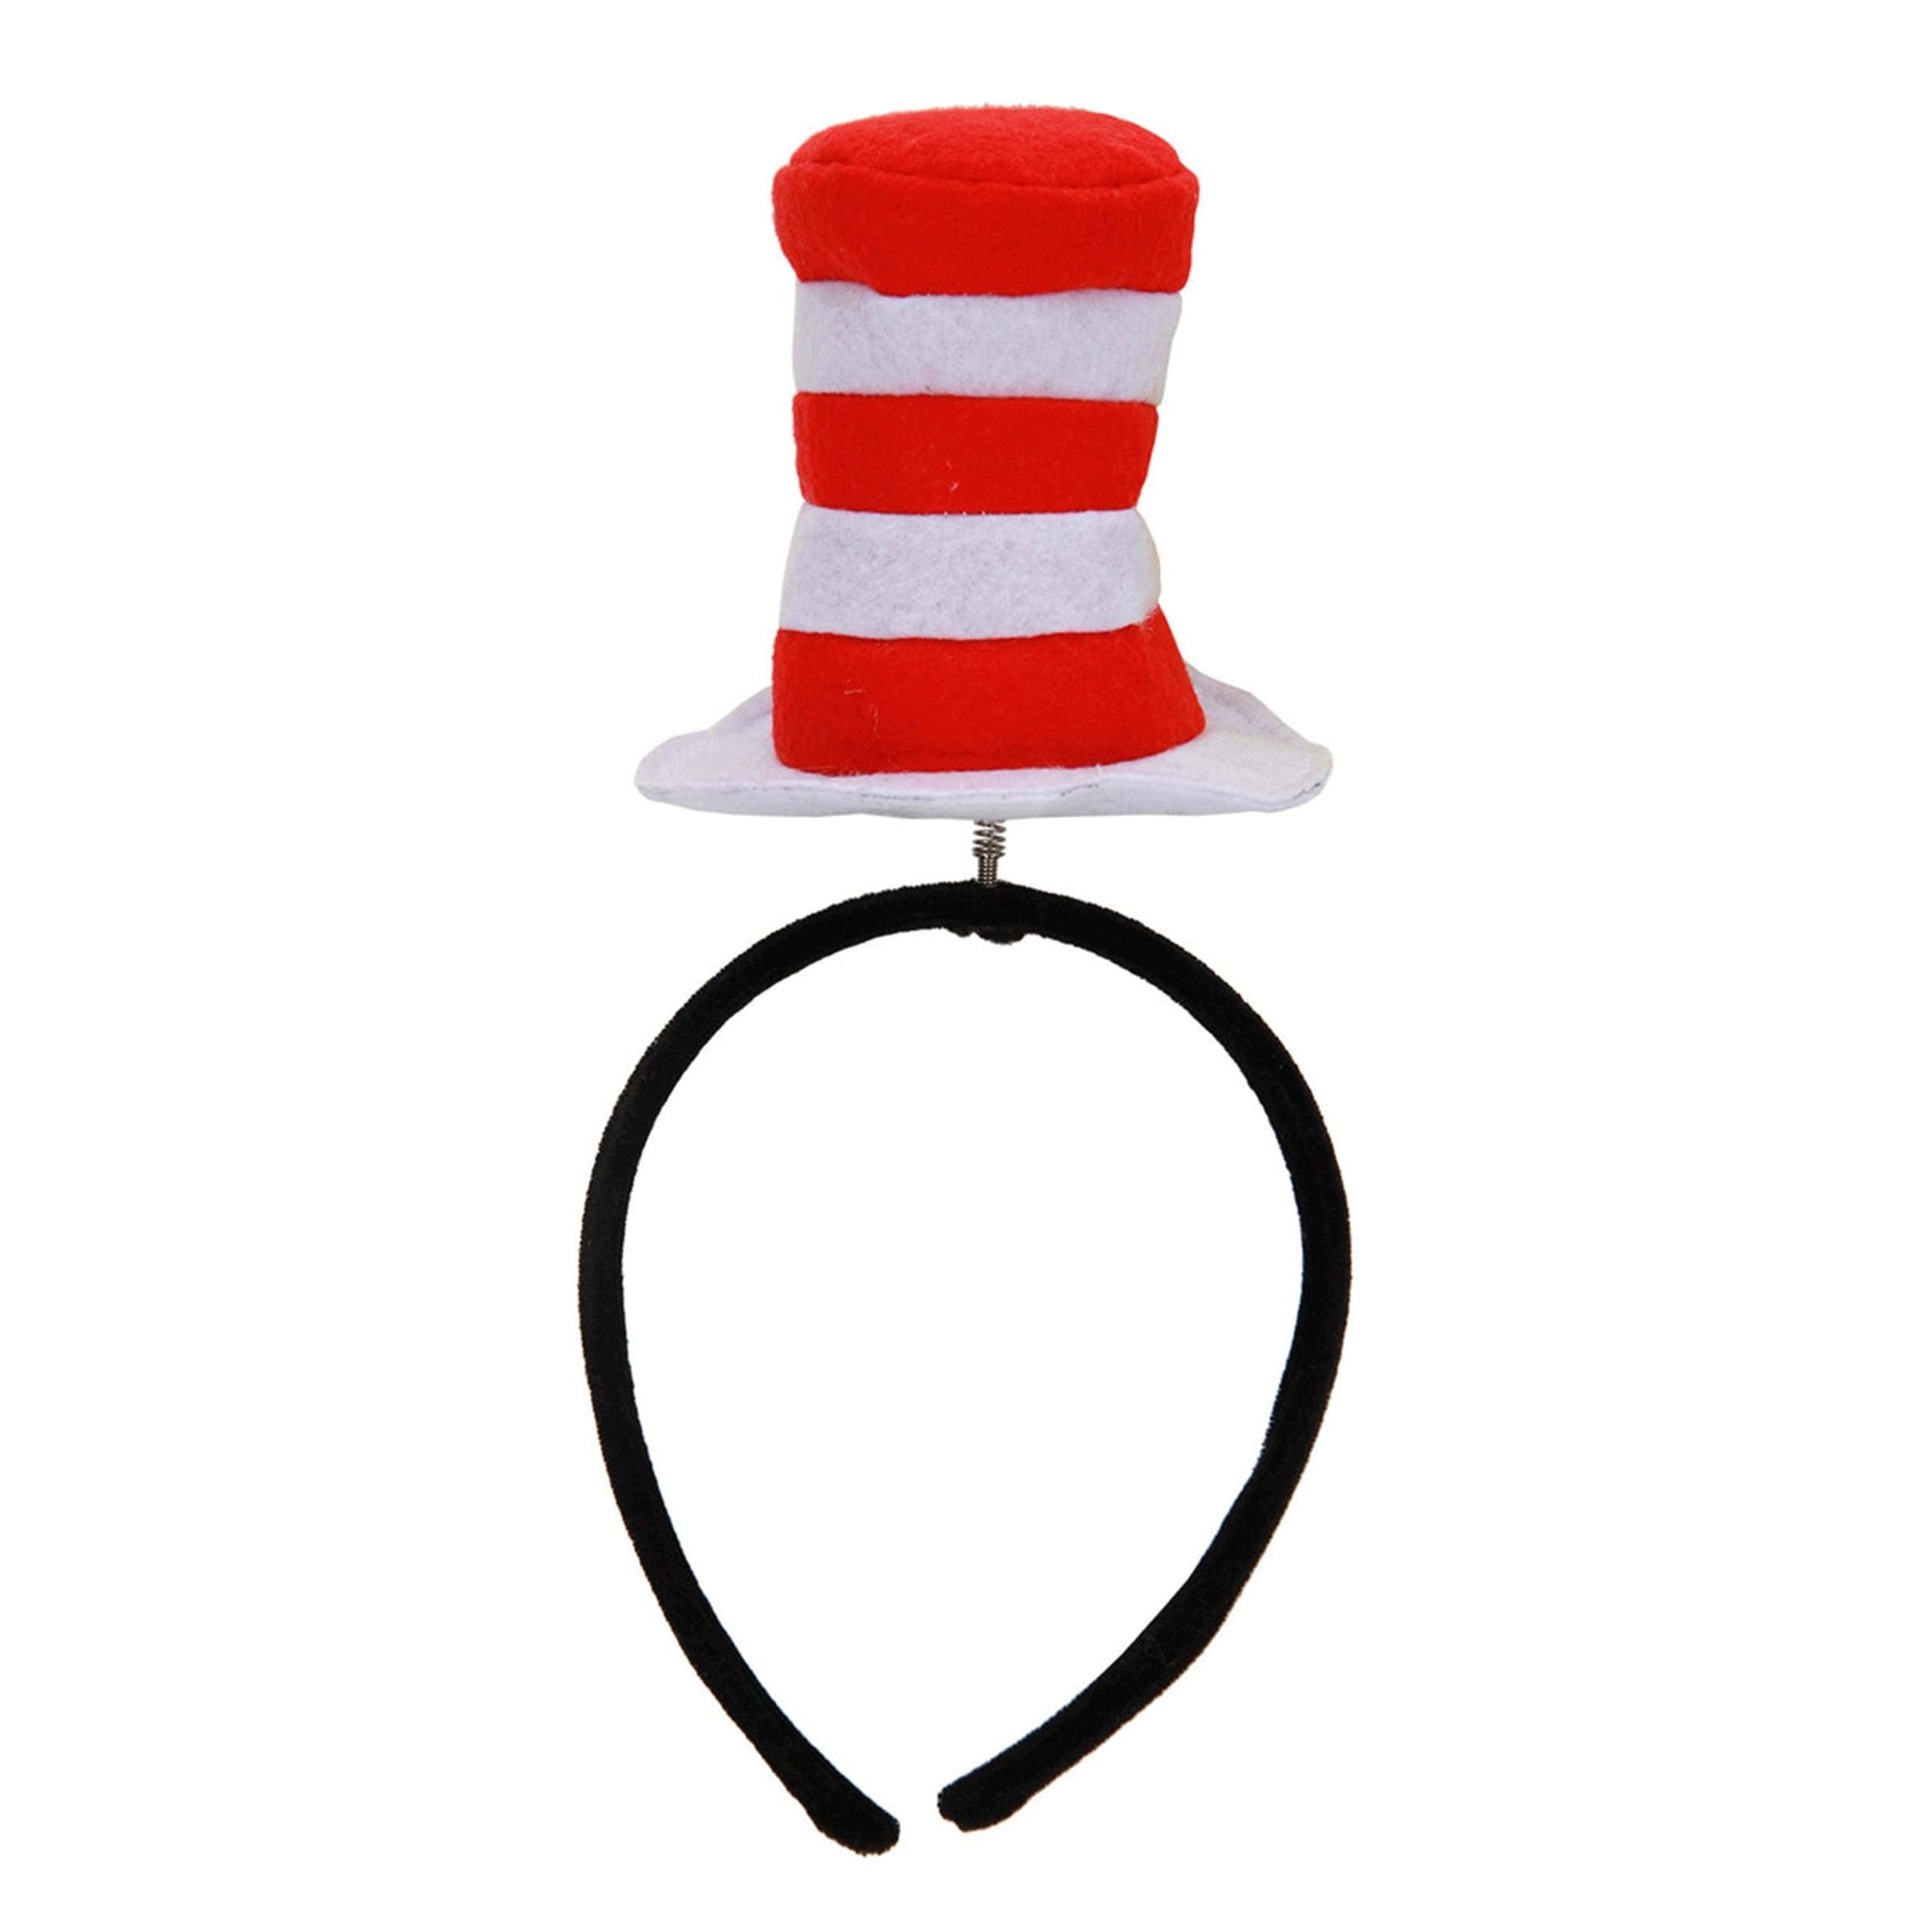 The Cat In The Hat Springy Headband